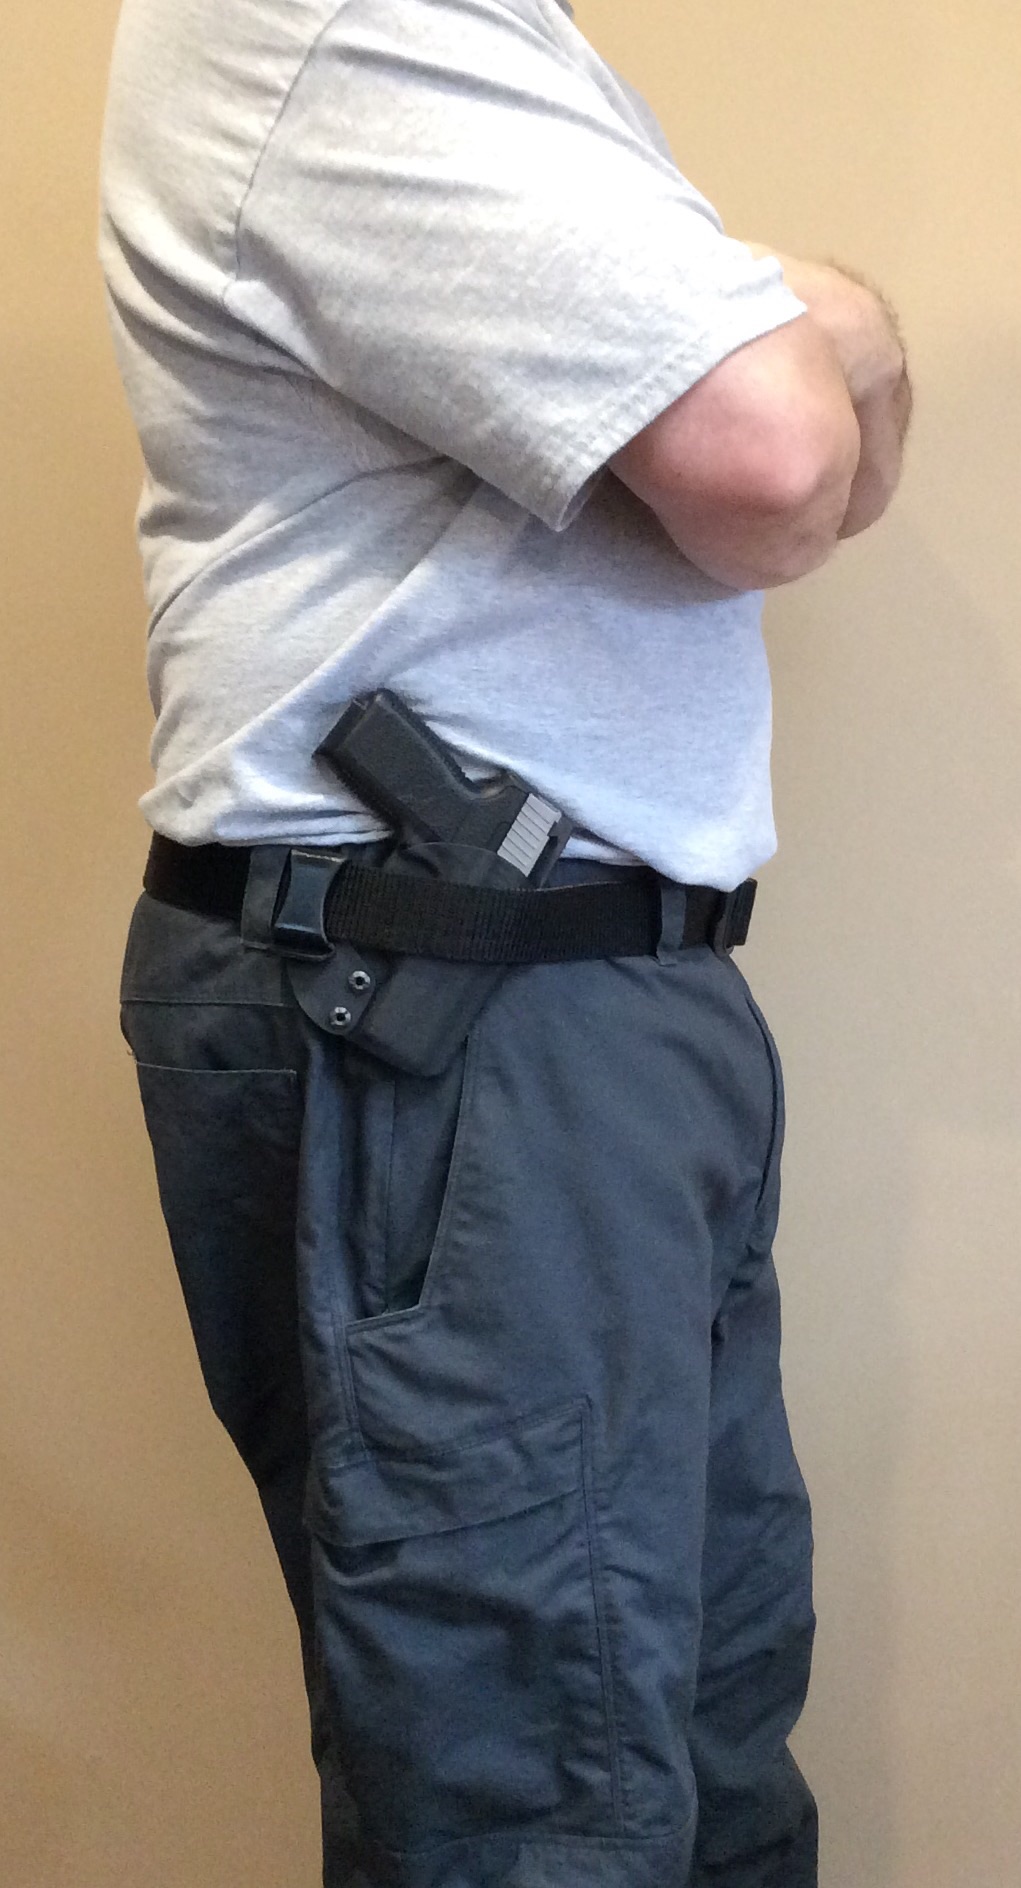 Our Holster Review Bias